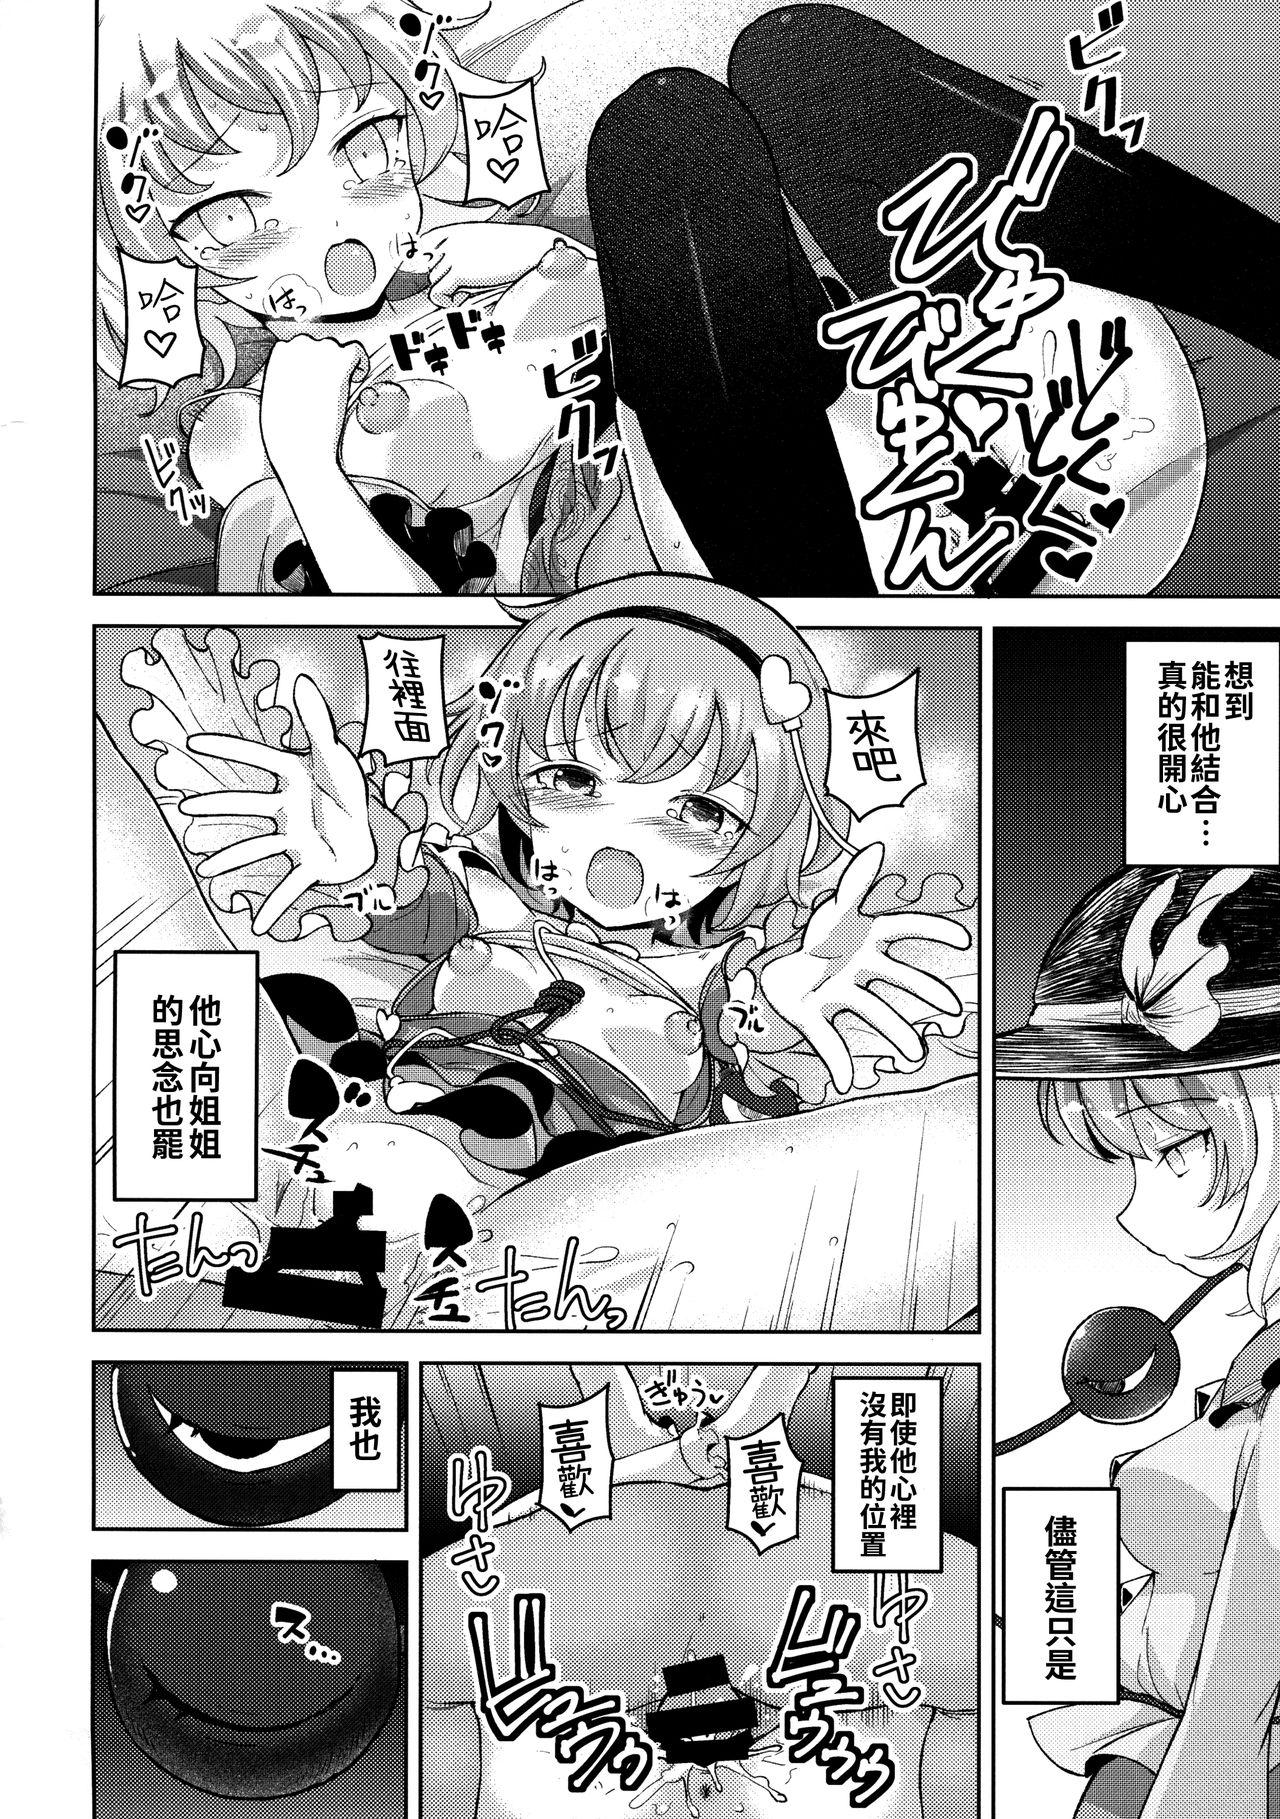 Classic Aisare Chireiden - Touhou project Rough - Page 6